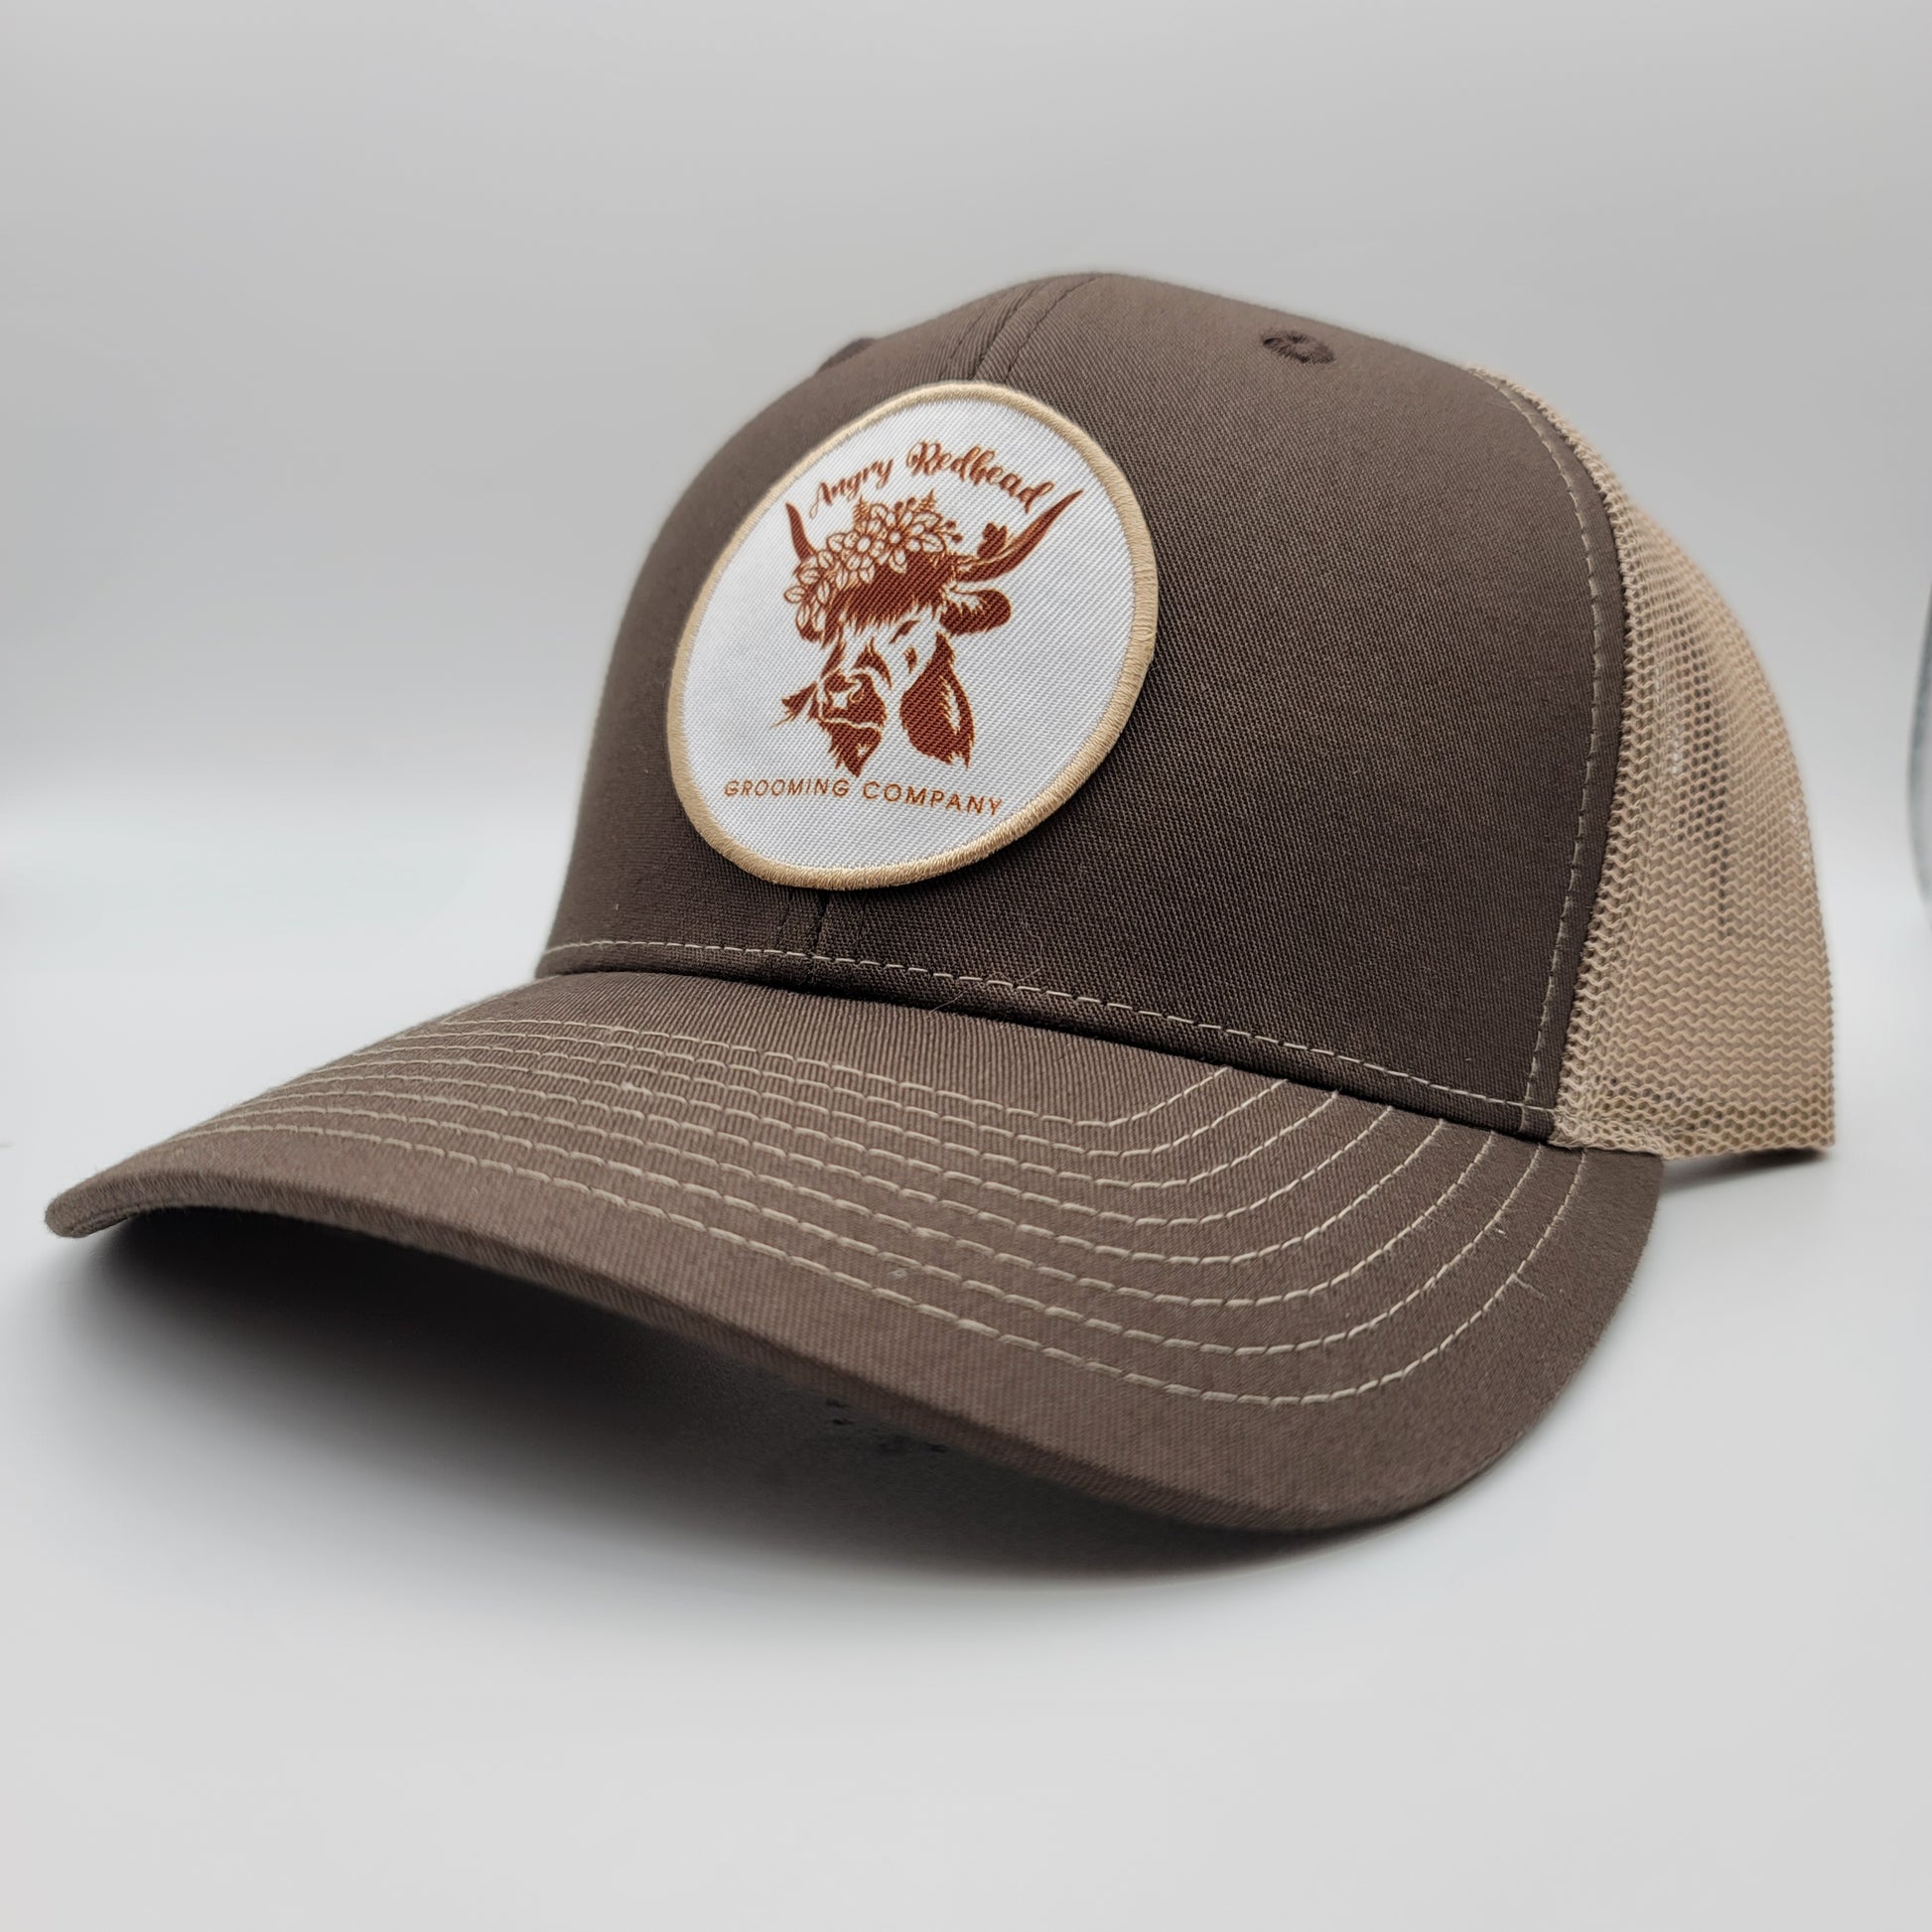 Angry Redhead Grooming Company Trucker Cap by Angry Redhead Grooming Co - angryredheadgrooming.com